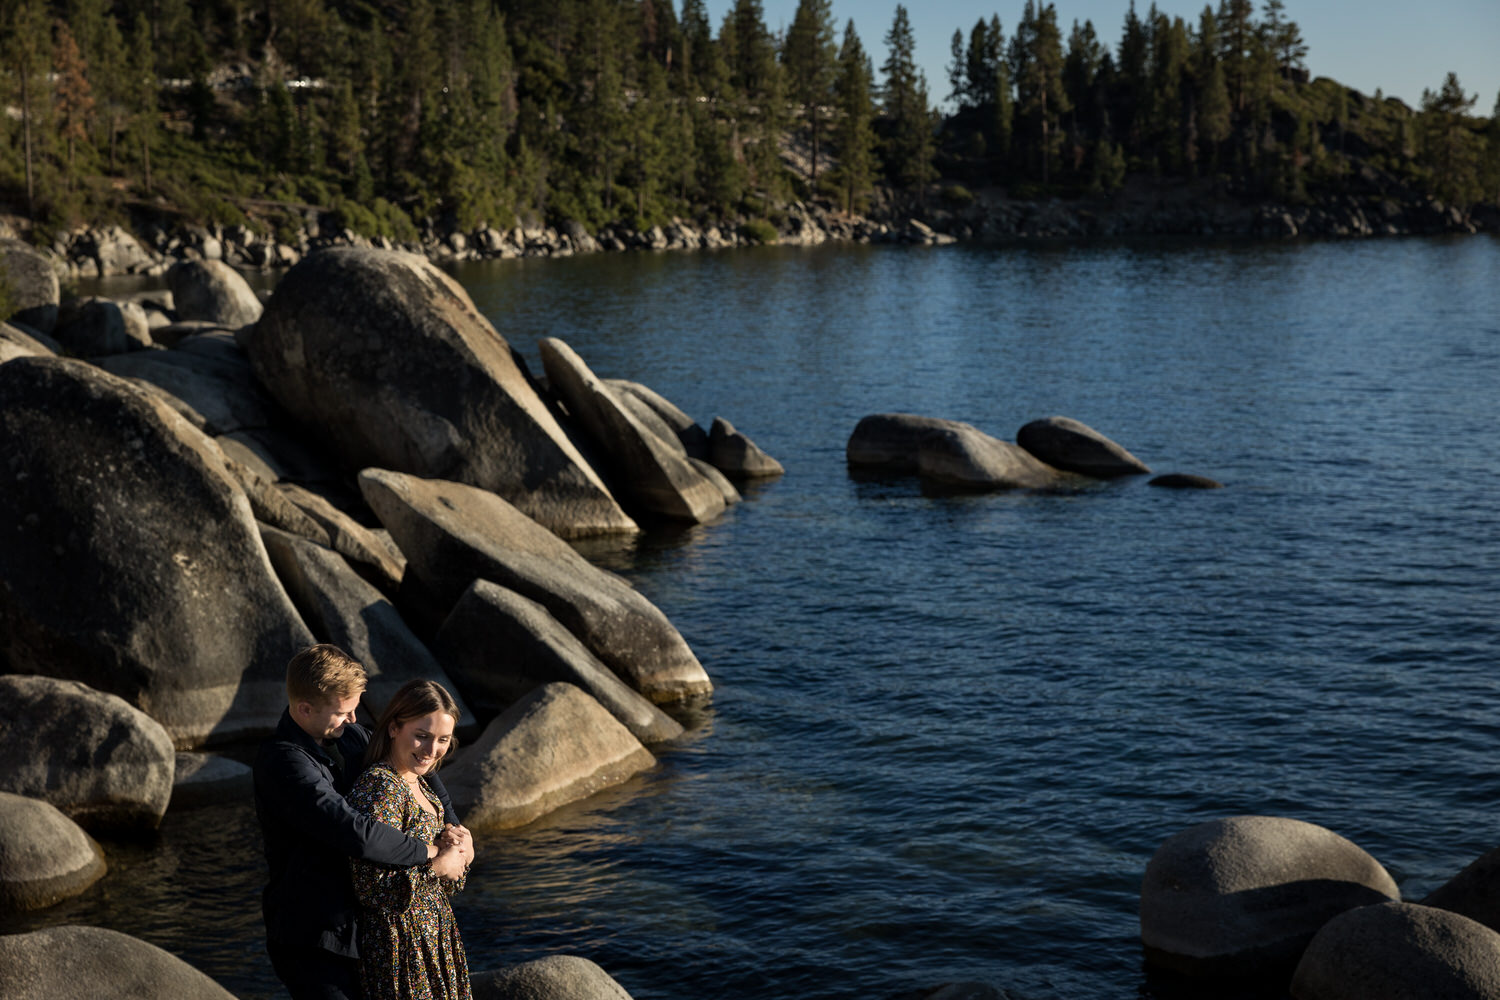 Afternoon surprise wedding proposal and engagement photos on the rocky eastern shore of Lake Tahoe.